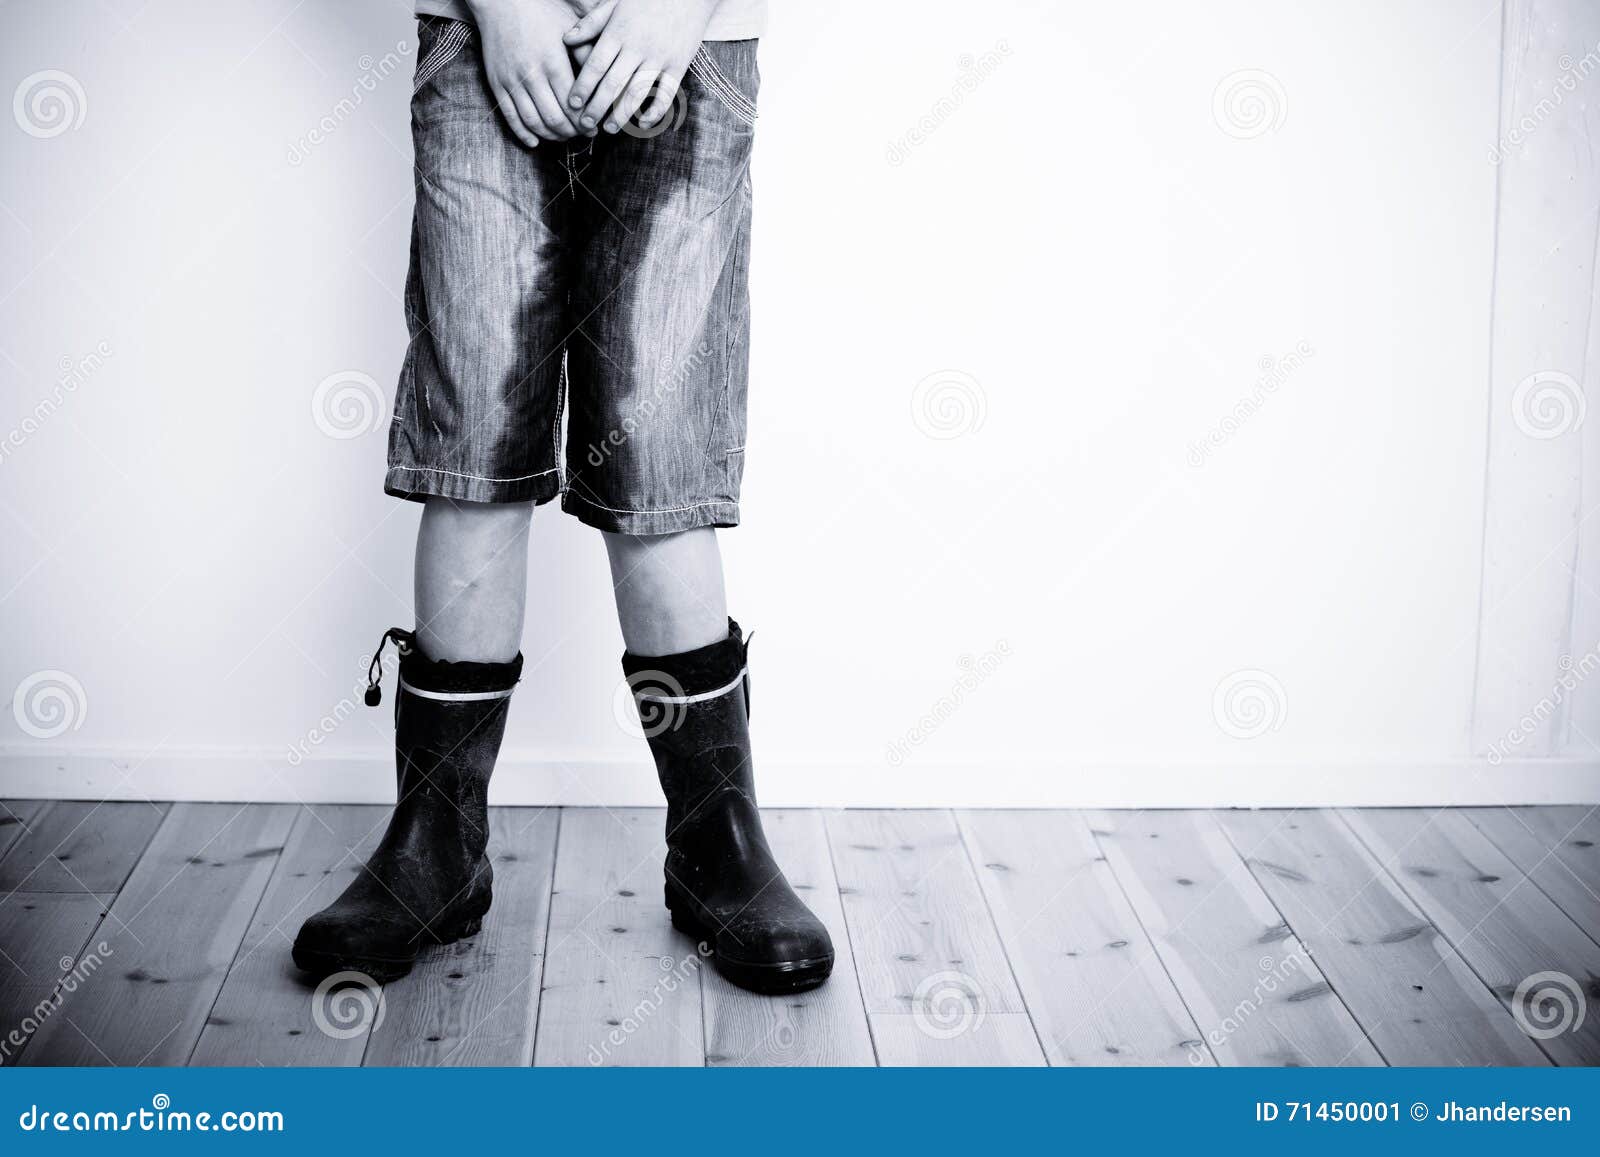 Legs of Teenager with Wet Pants and Boots Stock Image - Image of shame,  childhood: 71450001